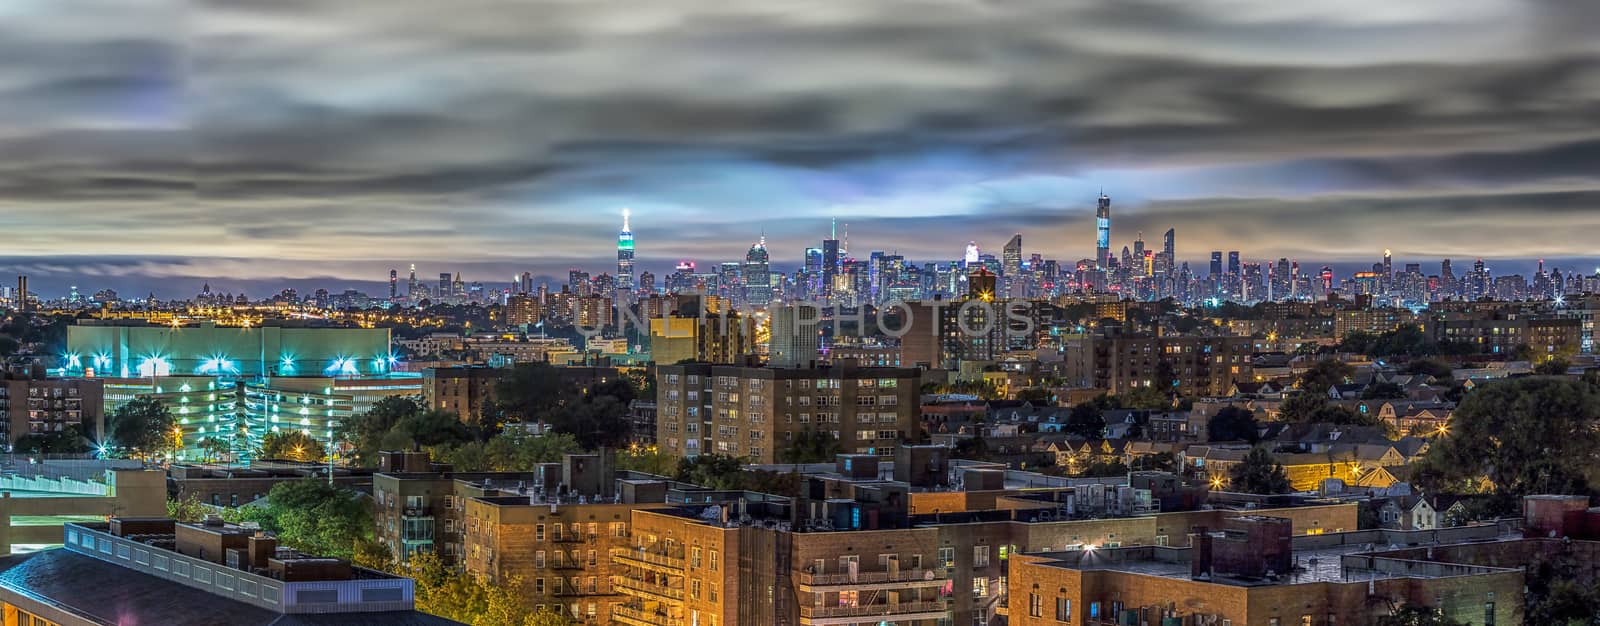 The view of Manhattan skyline at night from Queens, New York